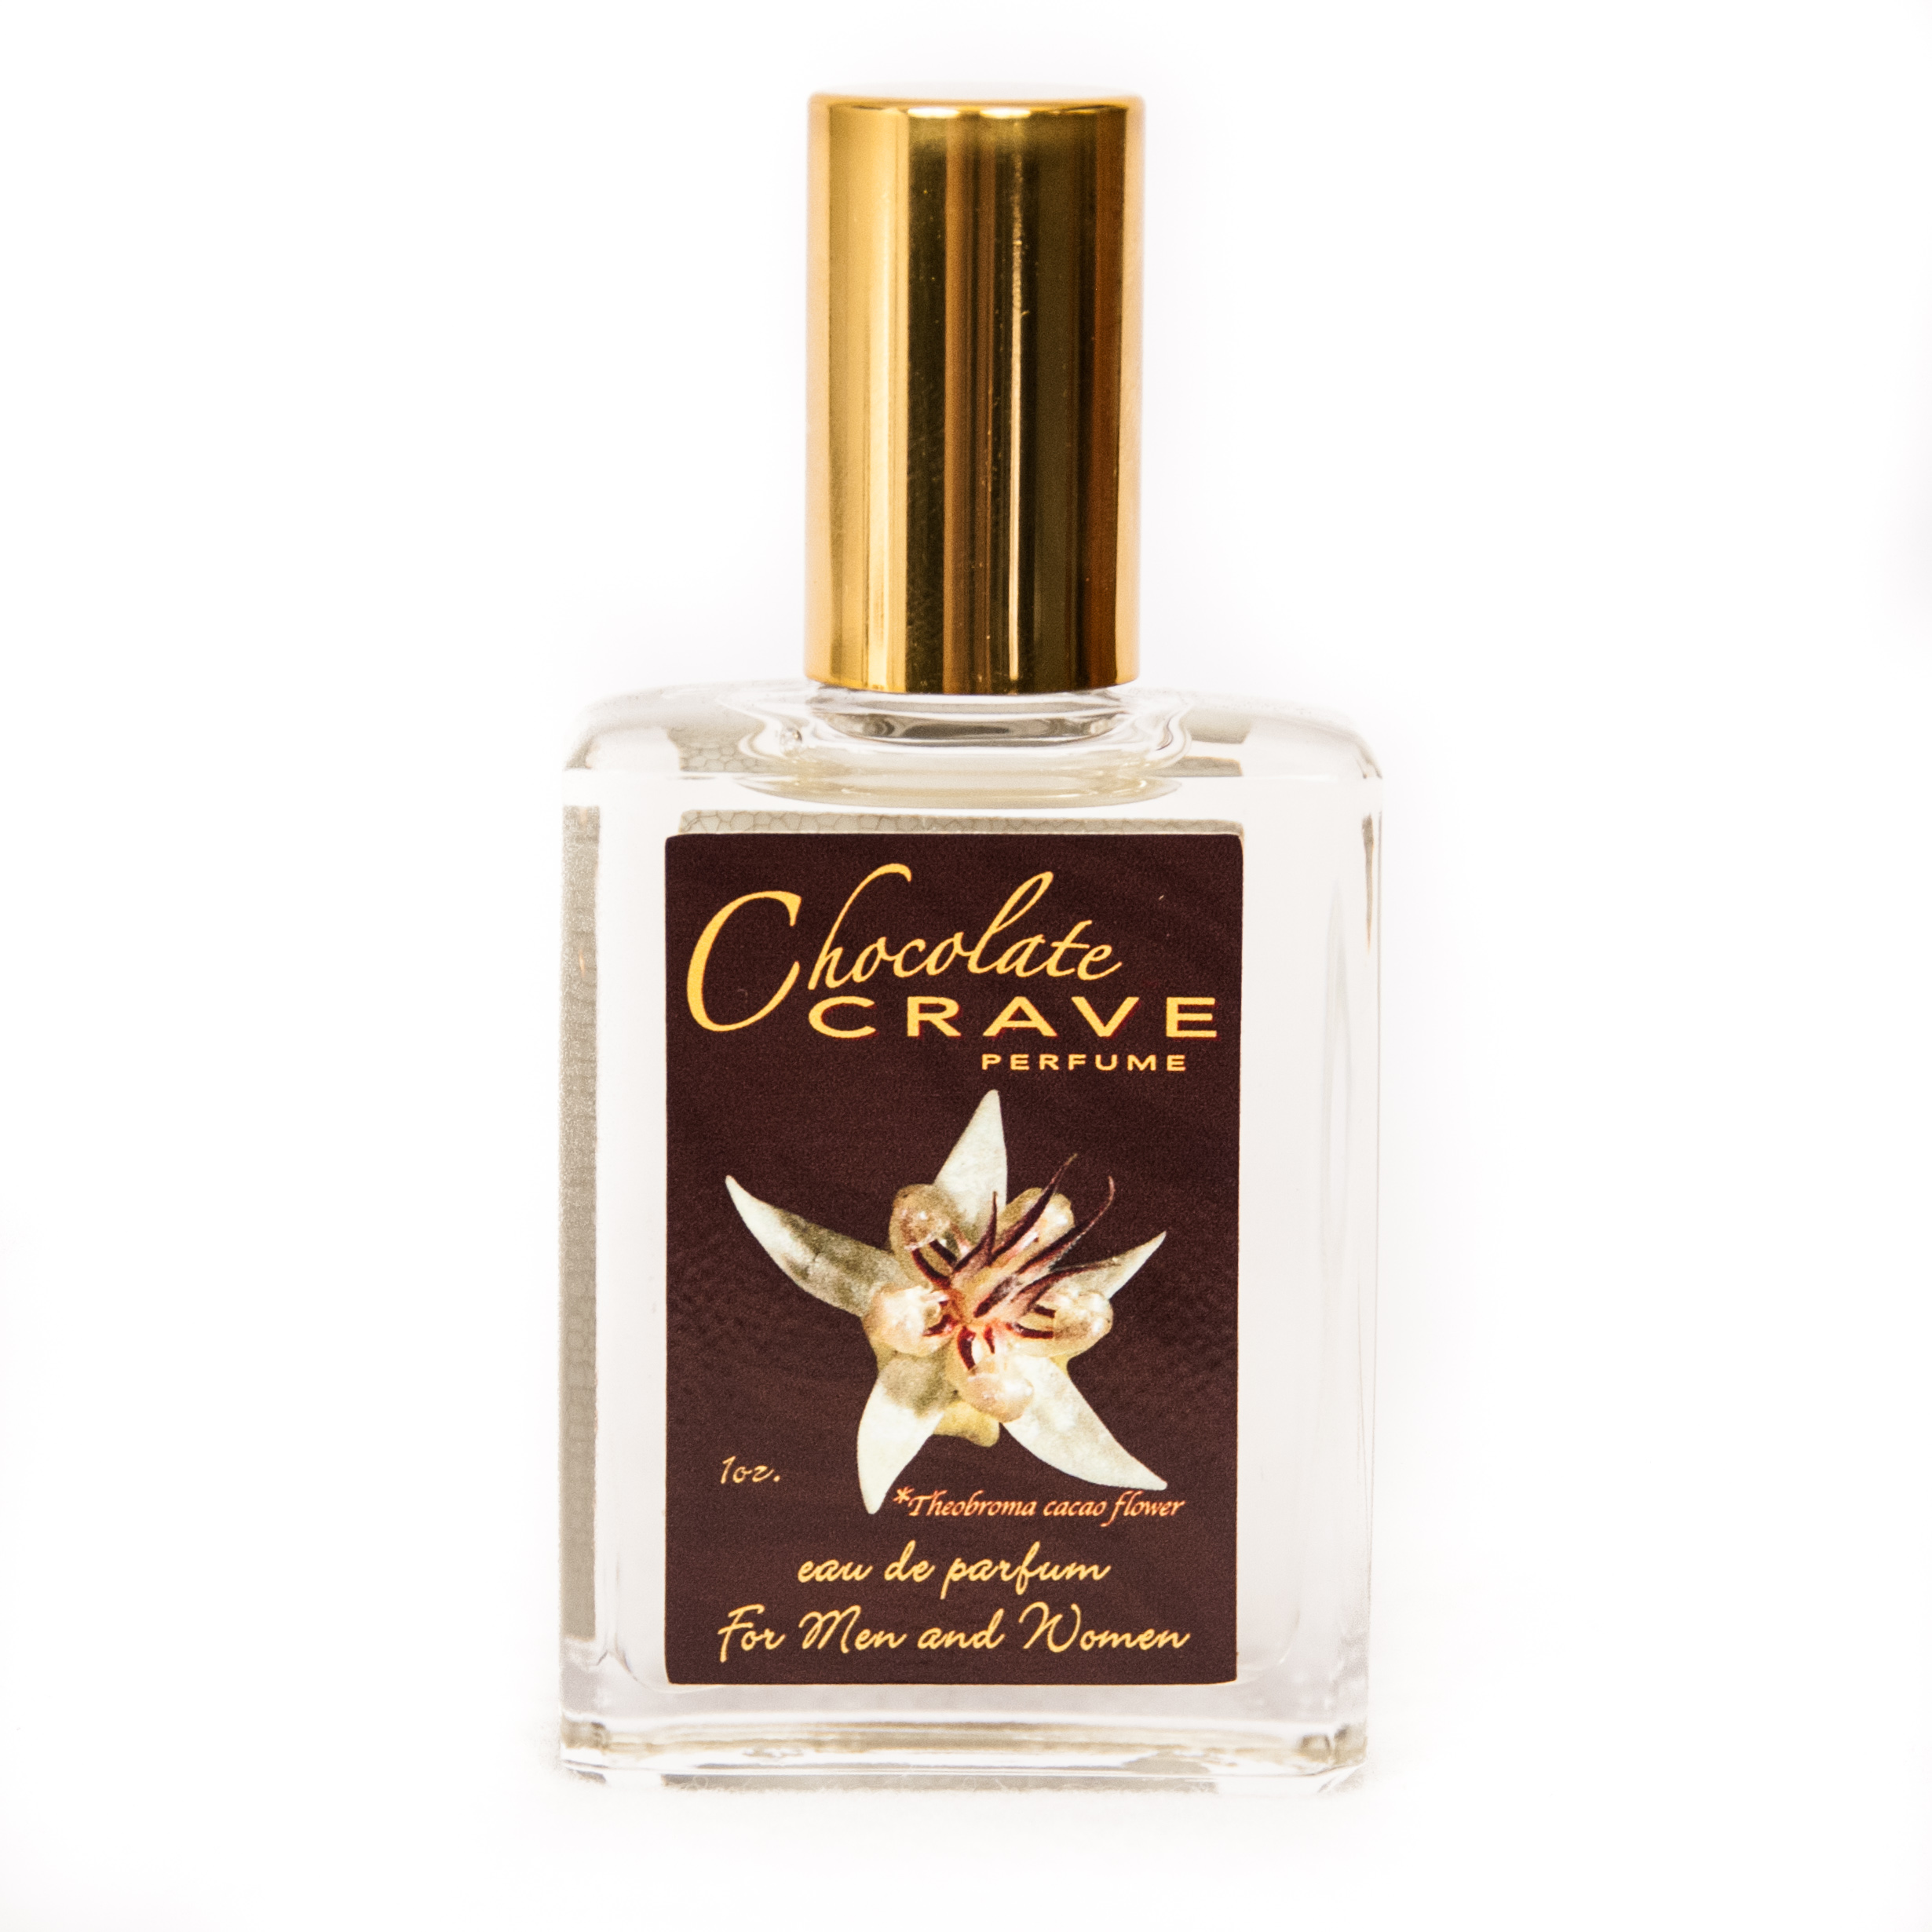 Chocolate Crave Perfume | Chocolate Gifts by Piece, Love & Chocolate